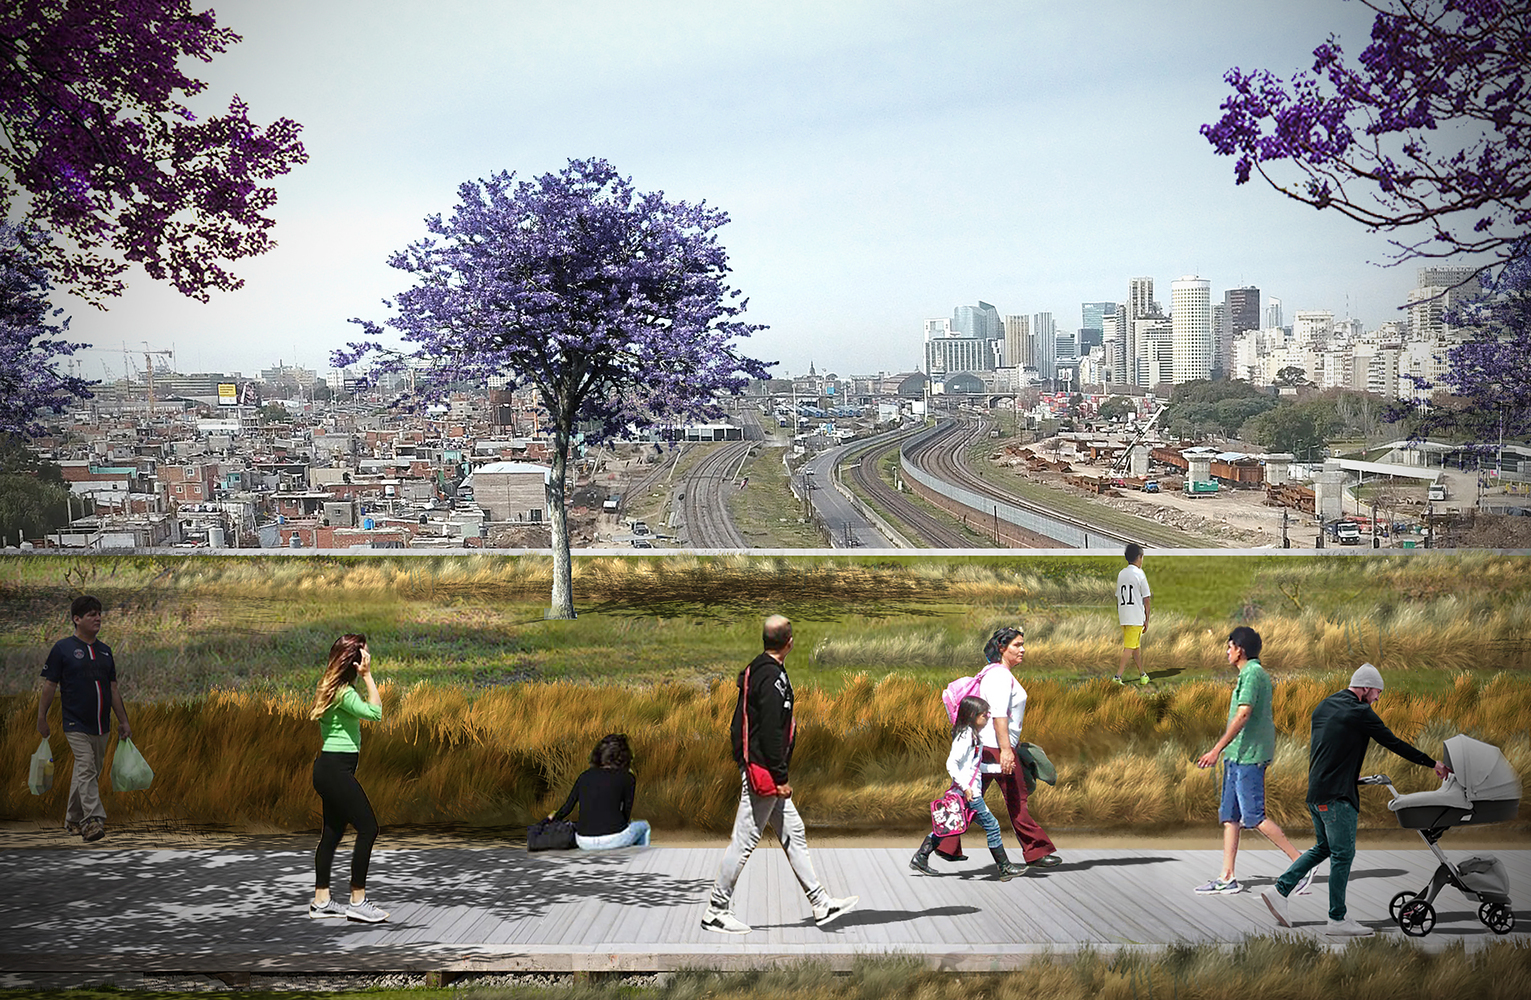 Elemental's new garden bridge building proposal for Buenos Aires. Images courtesy of Elemental